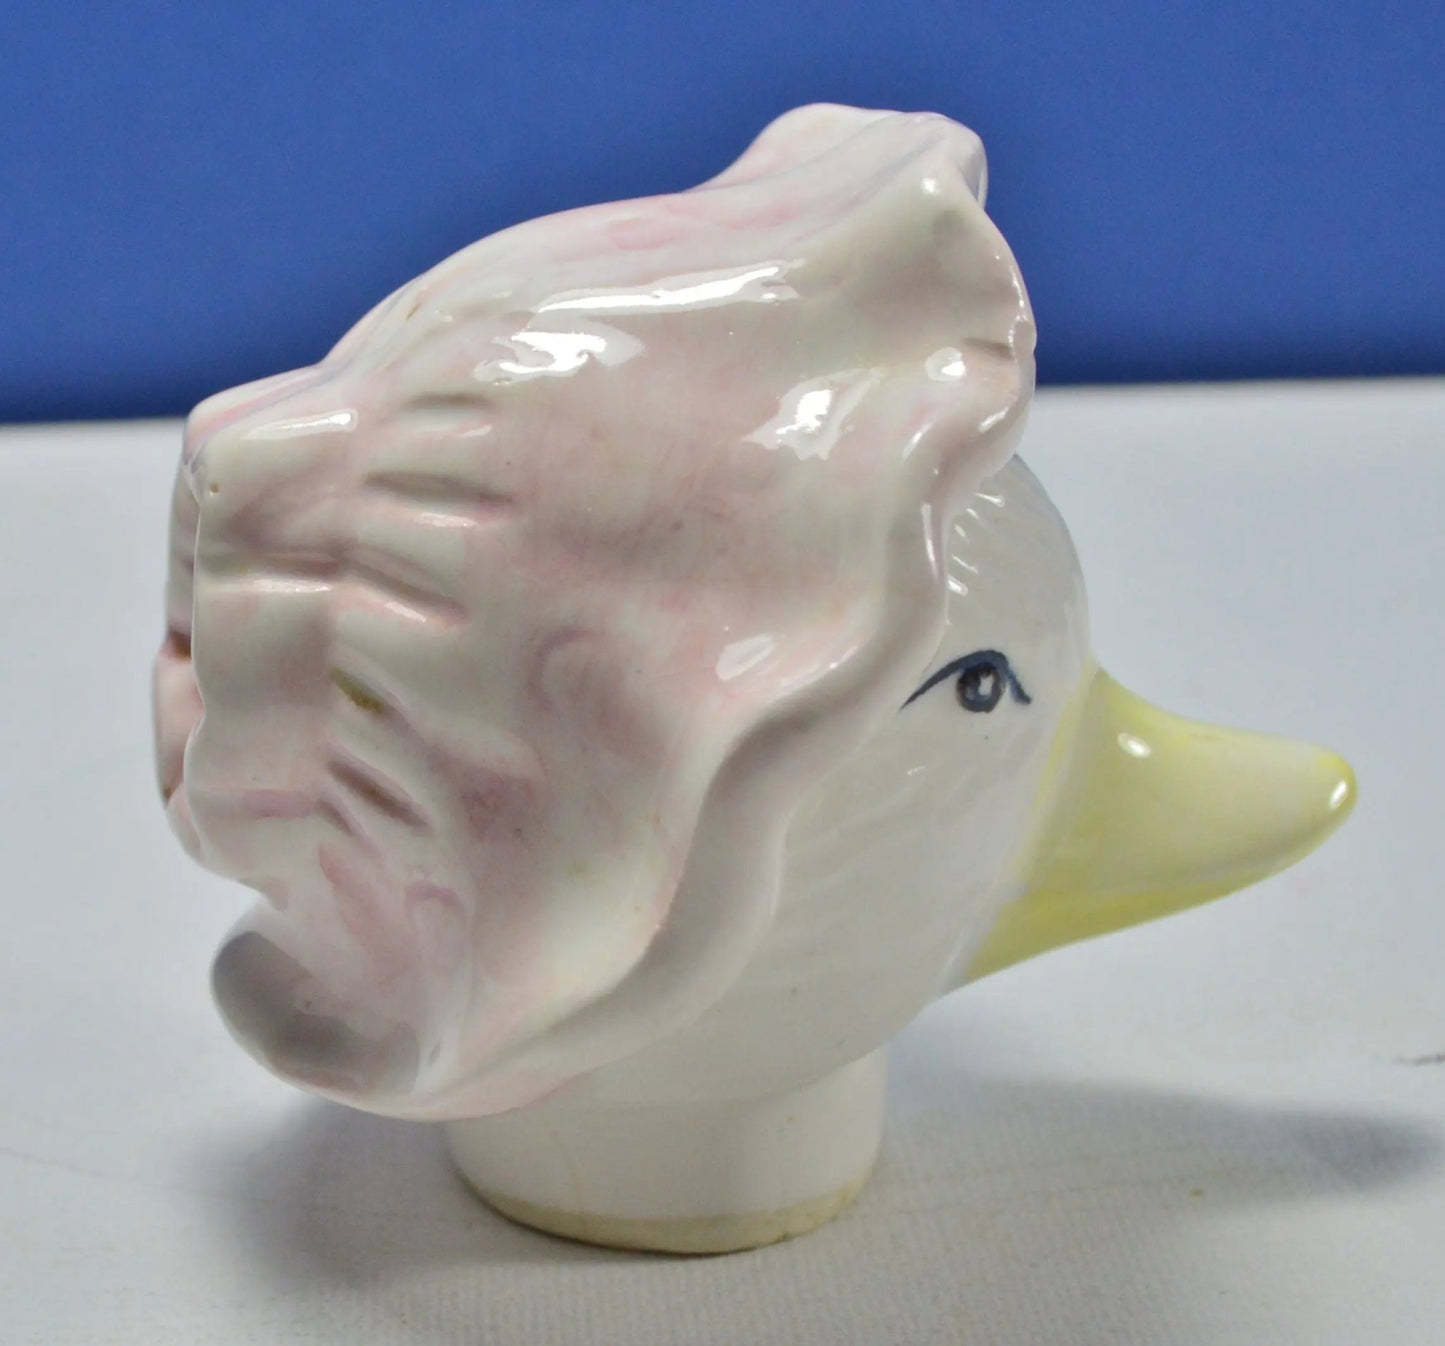 ORNAMENTAL DUCK TEAPOT(PREVIOUSLY OWNED)FAIRLY GOOD CONDITION - TMD167207